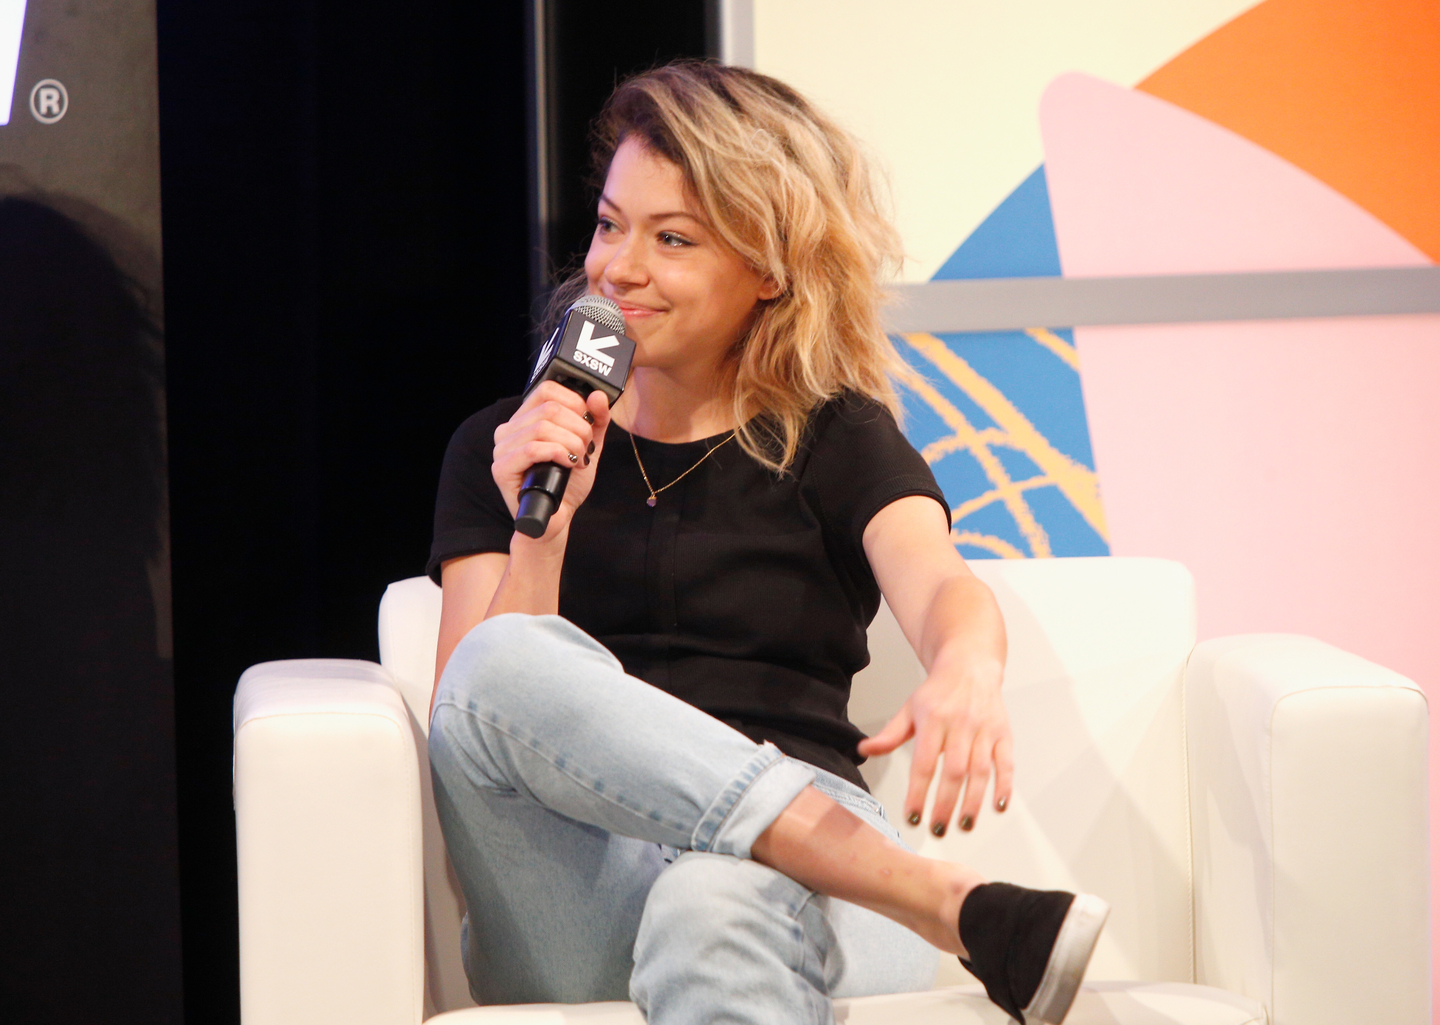 Tatiana Maslany discussed her career with Scott Aukerman. Photo by Steve Rogers Photography/Getty Images for SXSW